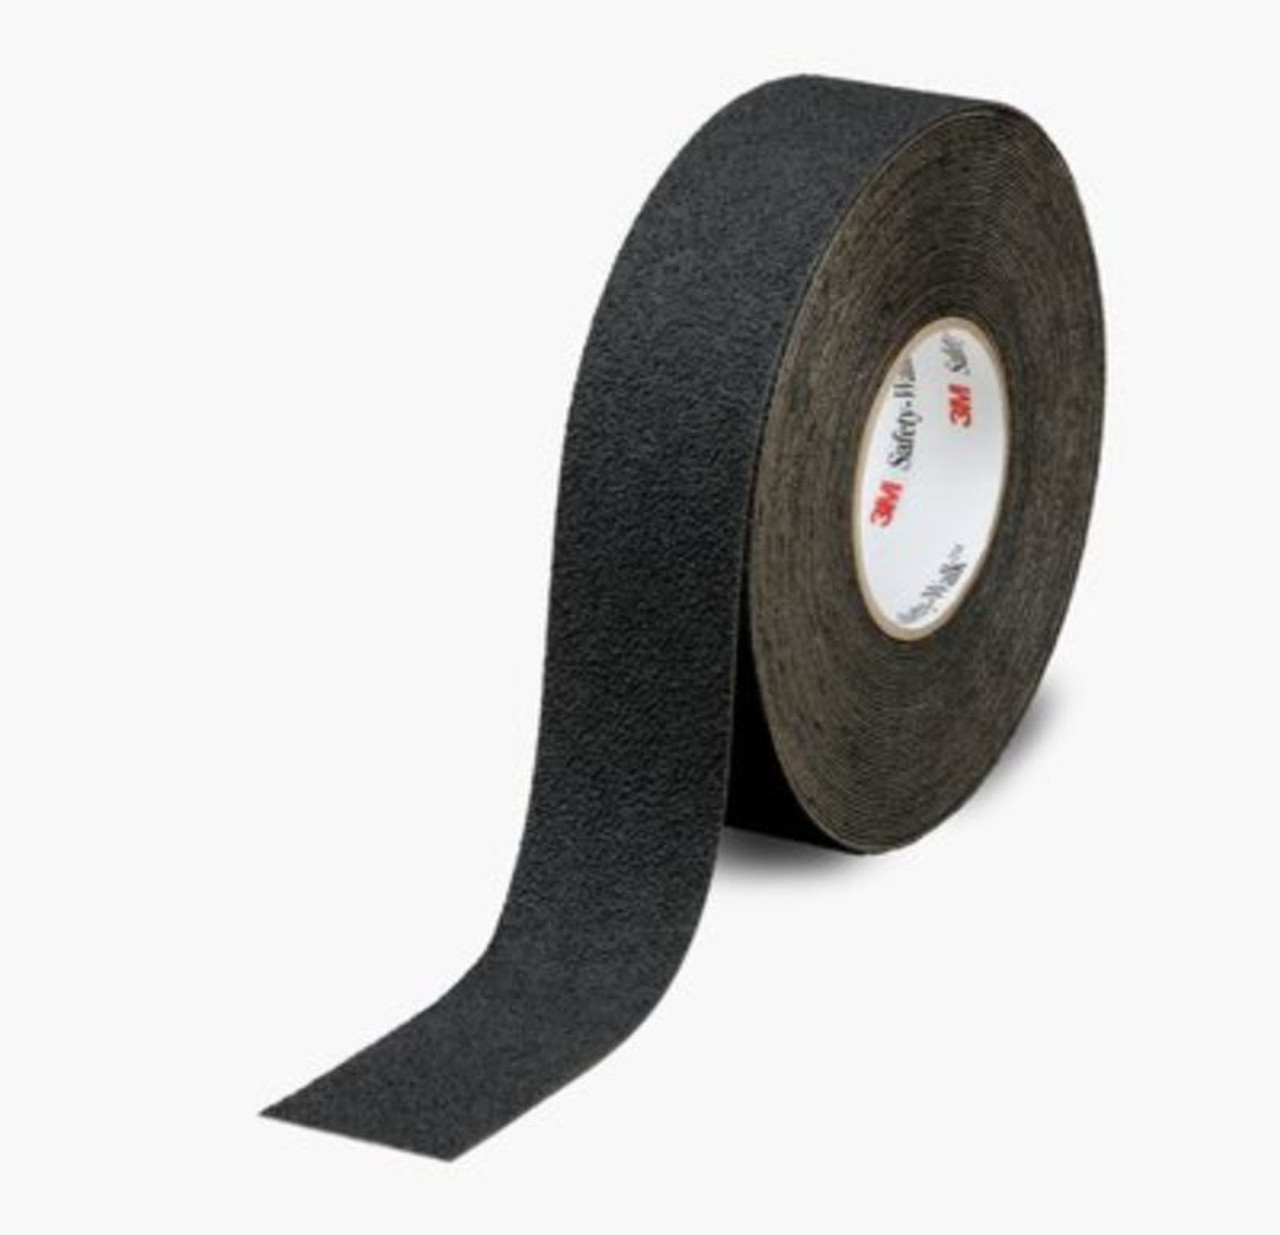 3M™ Safety-Walk™ Slip-Resistant Medium Resilient Tapes and Treads 310, Black, 12 in x 60 ft, Roll